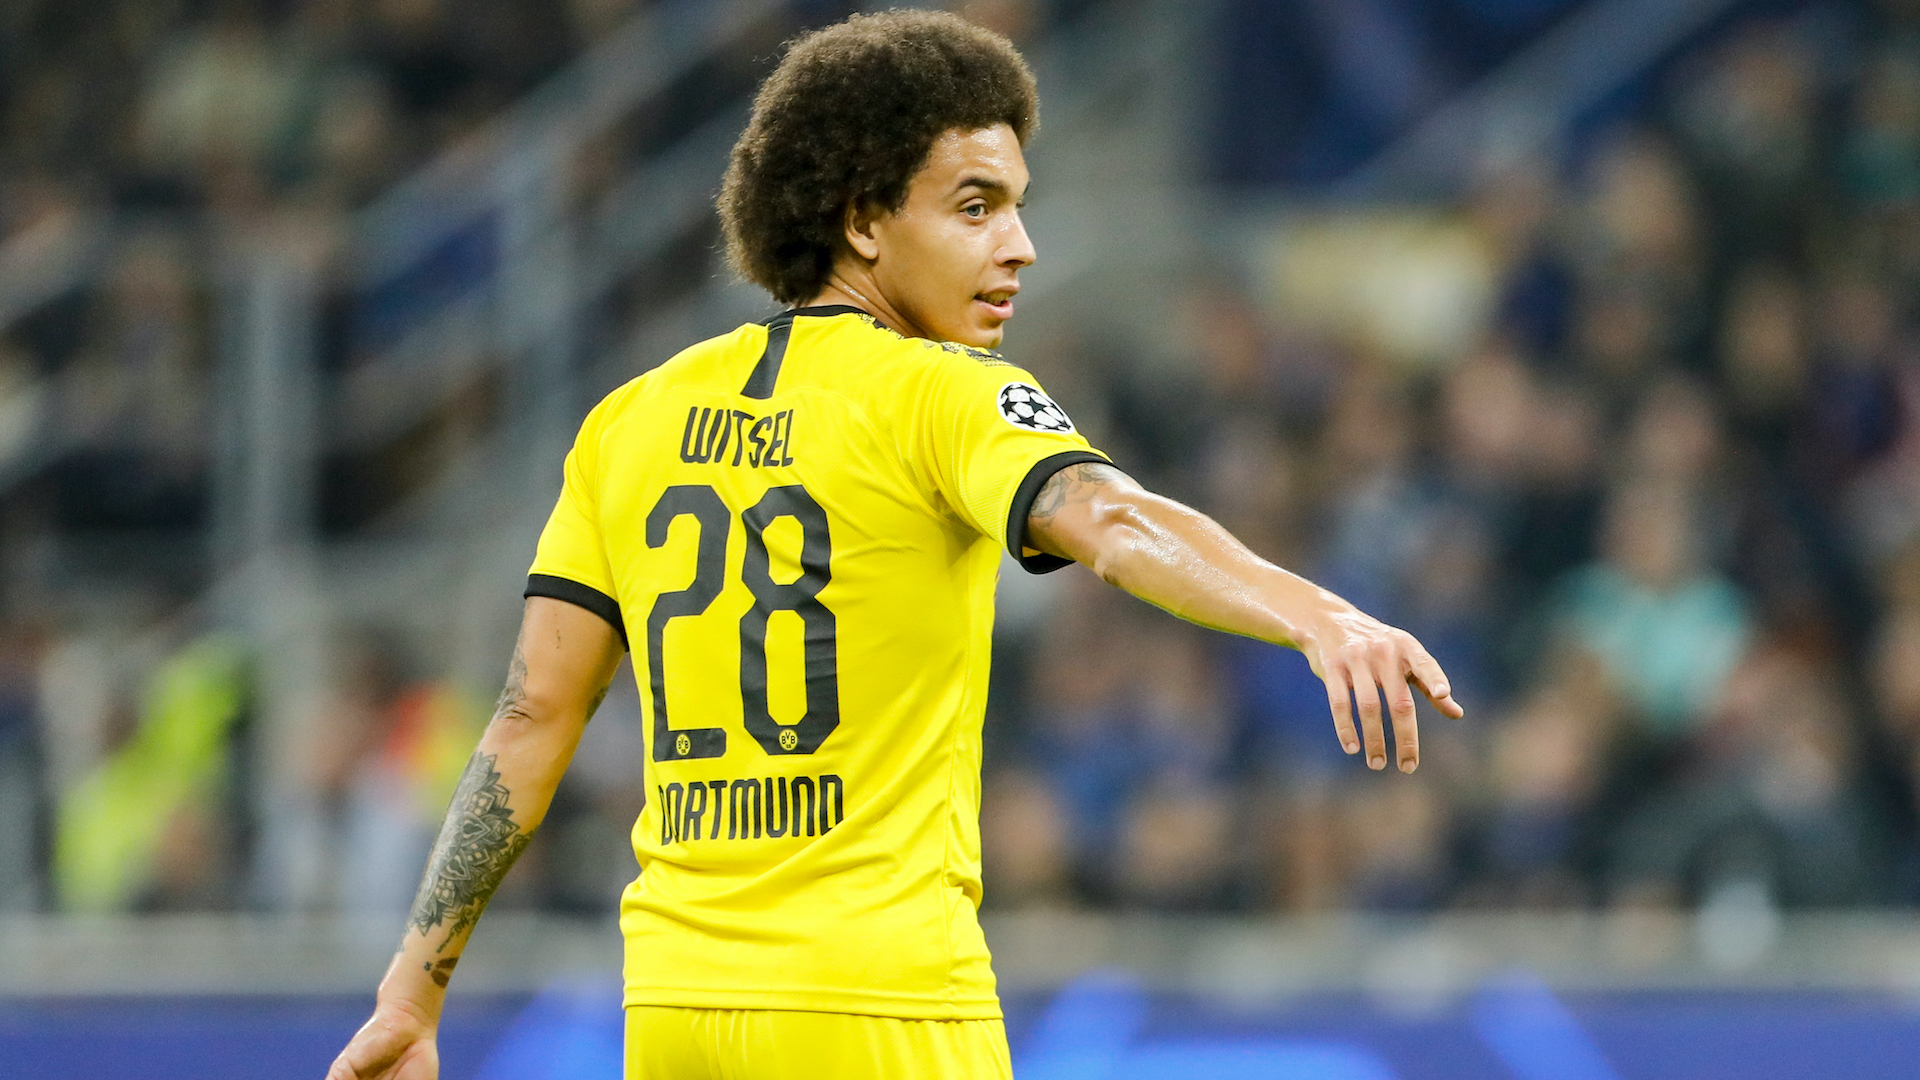 Axel Witsel playing for Borussia Dortmund